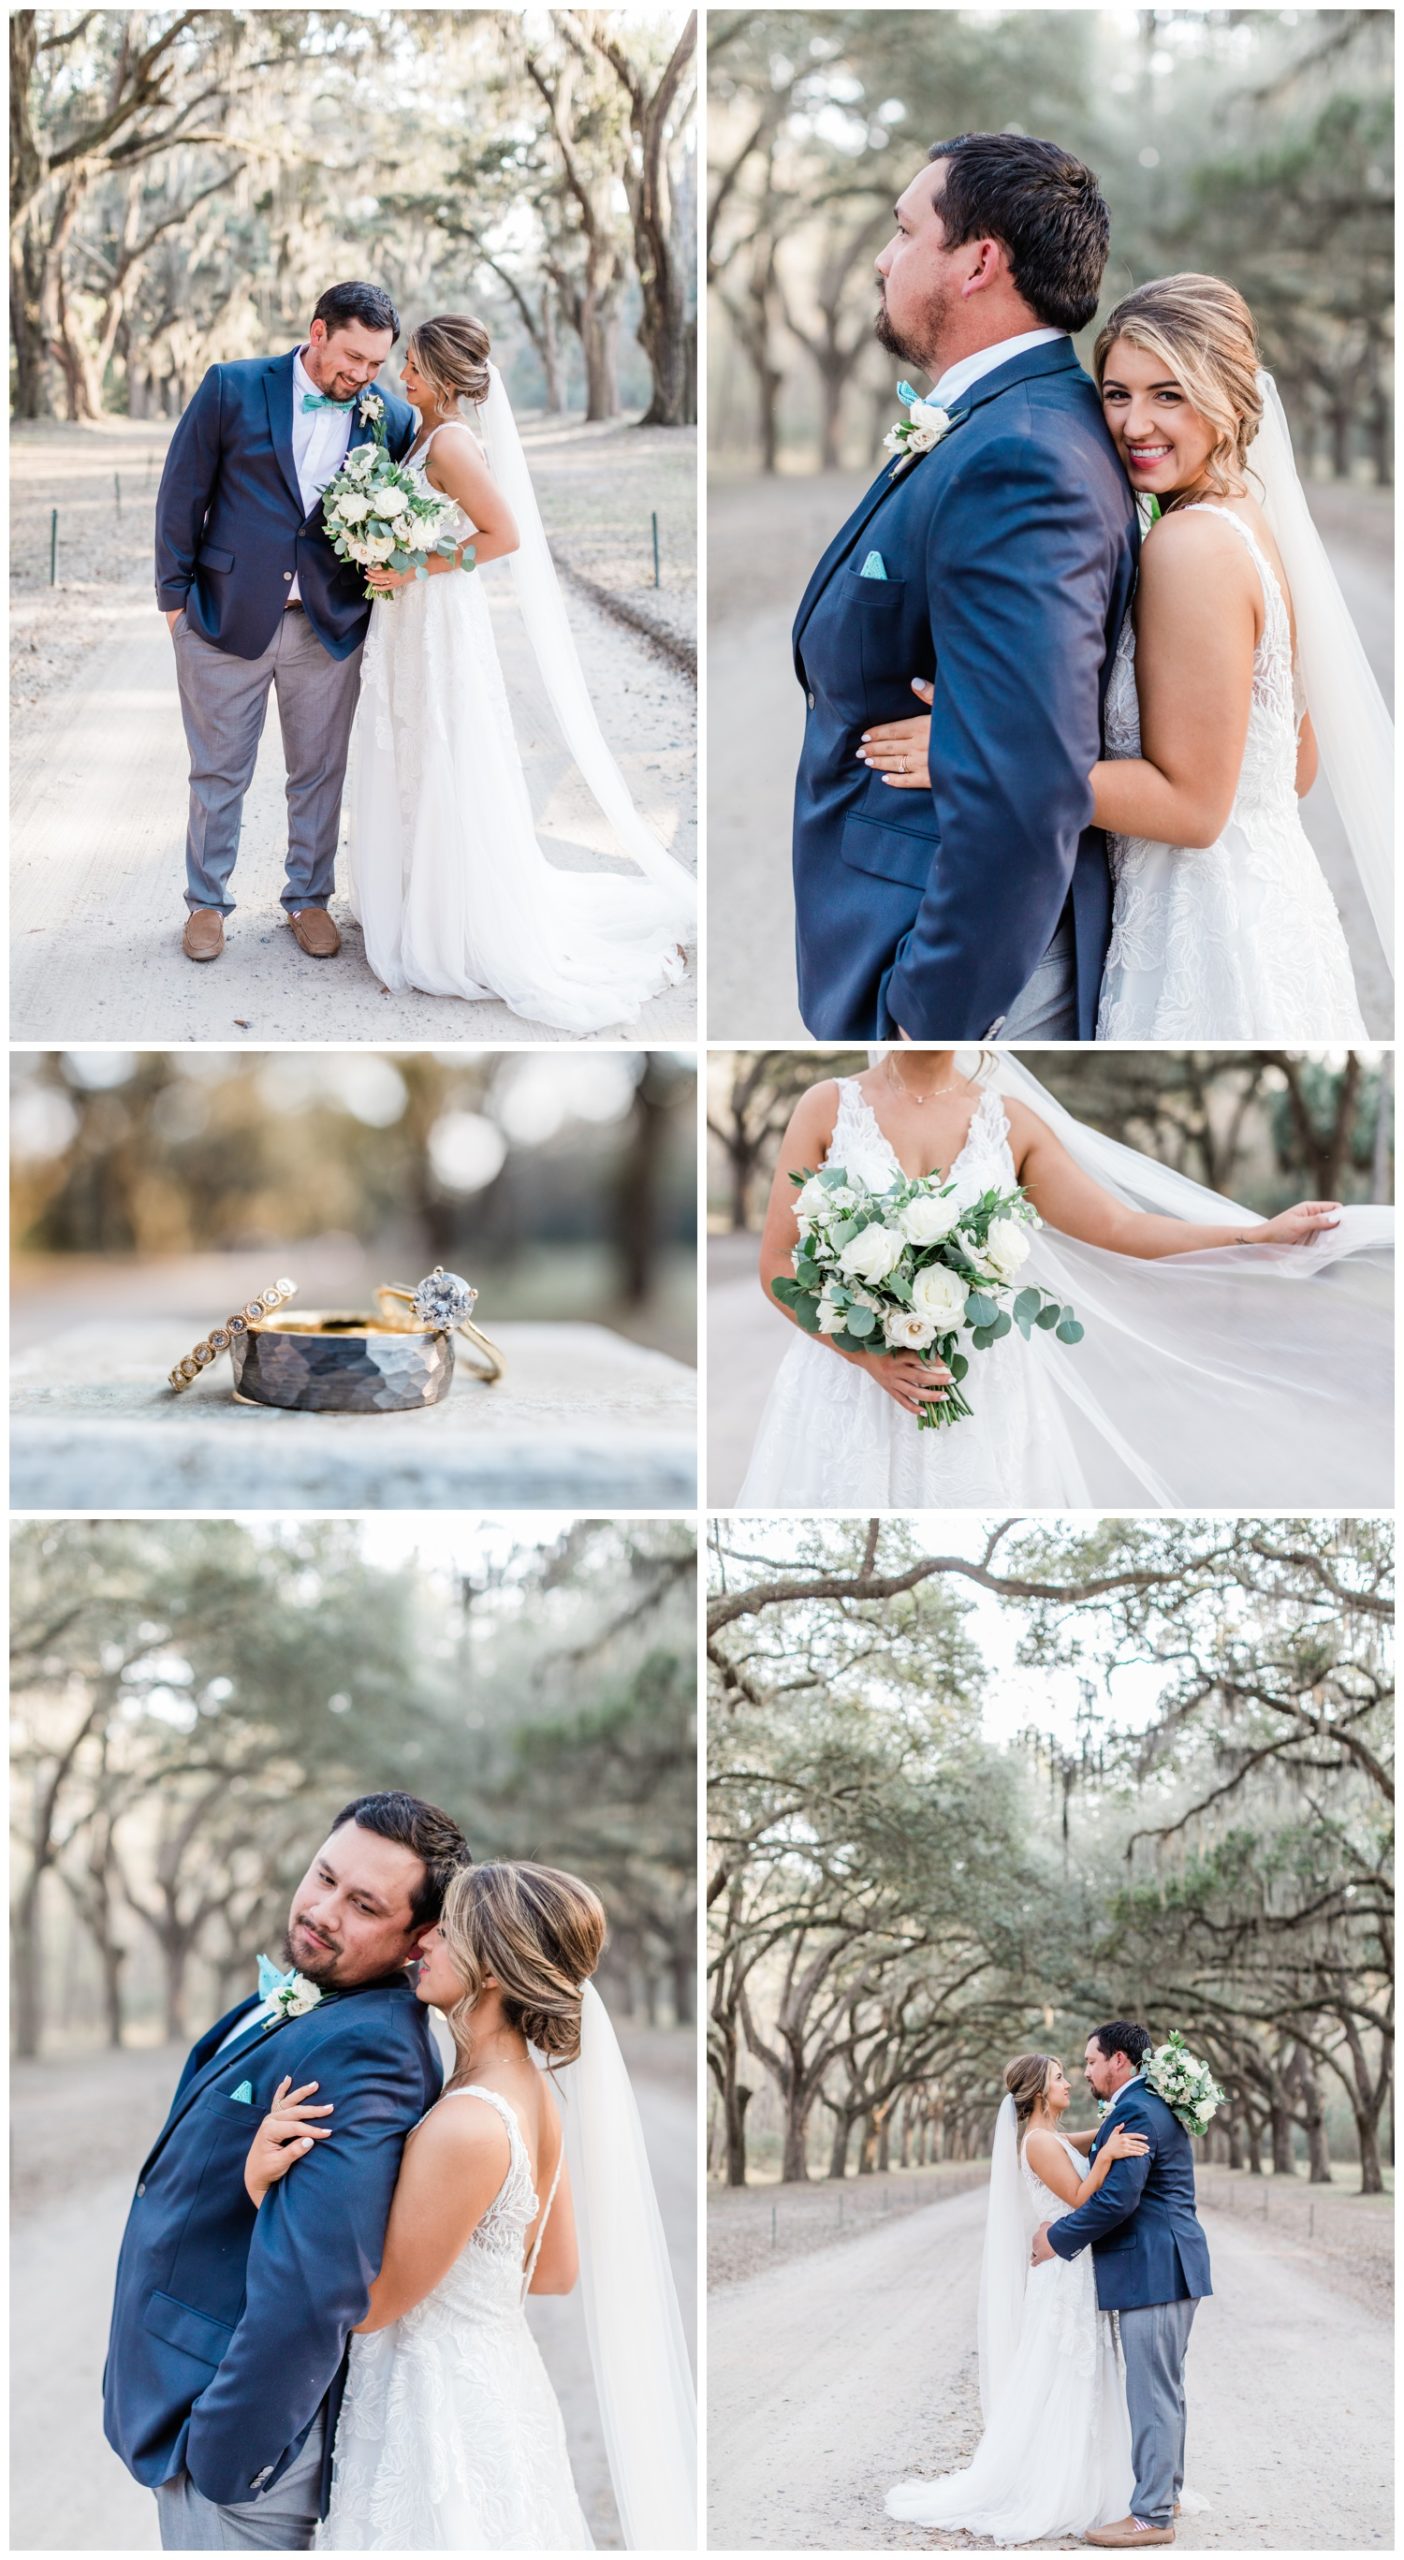 Couples photos - savannah elopement package - flowers by ivory and beau